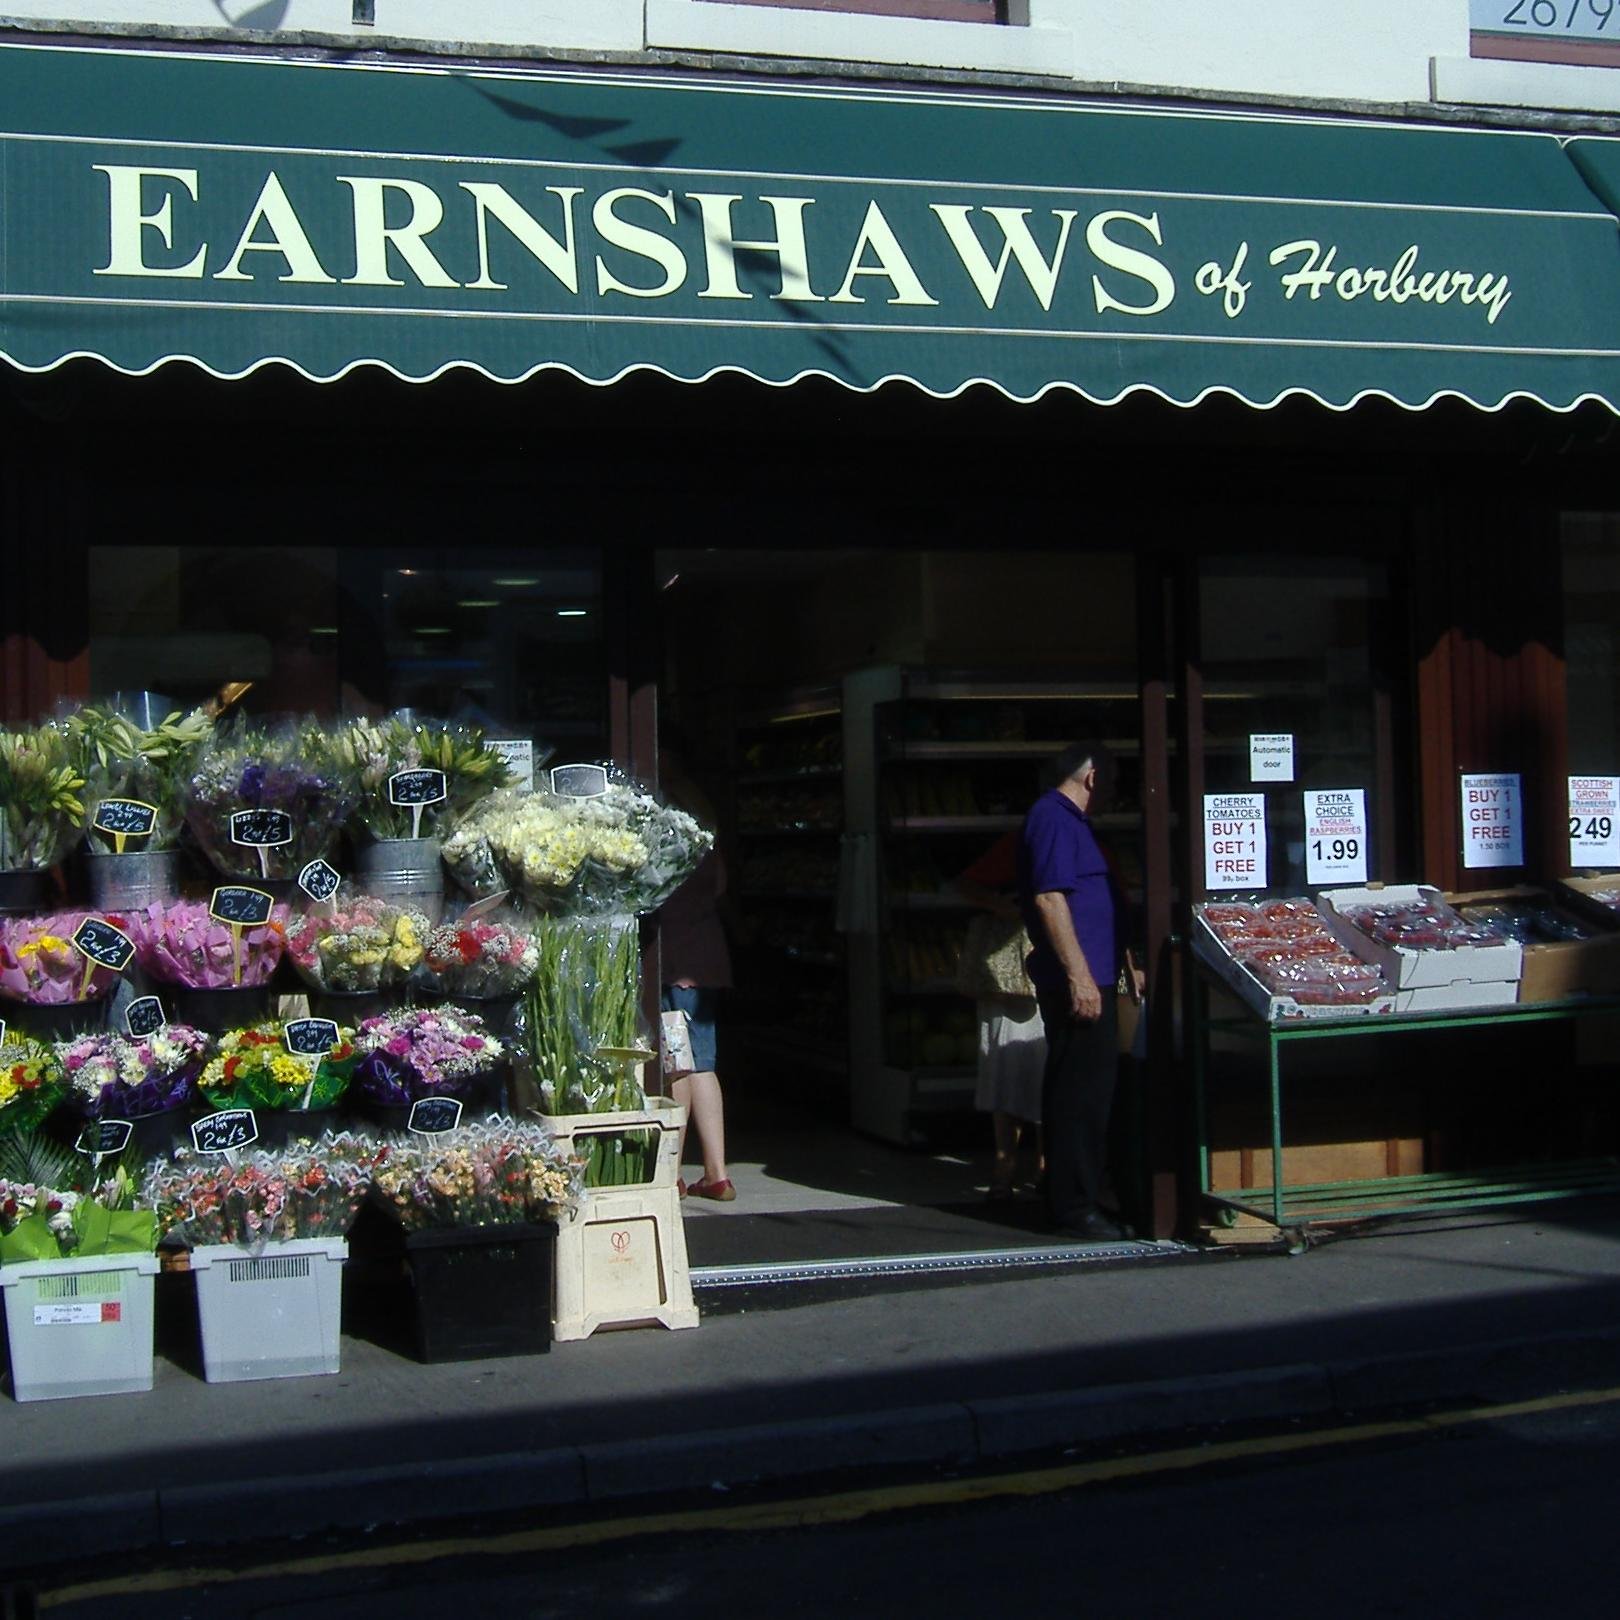 Retailers and wholesalers. We have been trading in the finest quality and value fruit, vegetables and flowers for over 75 years.